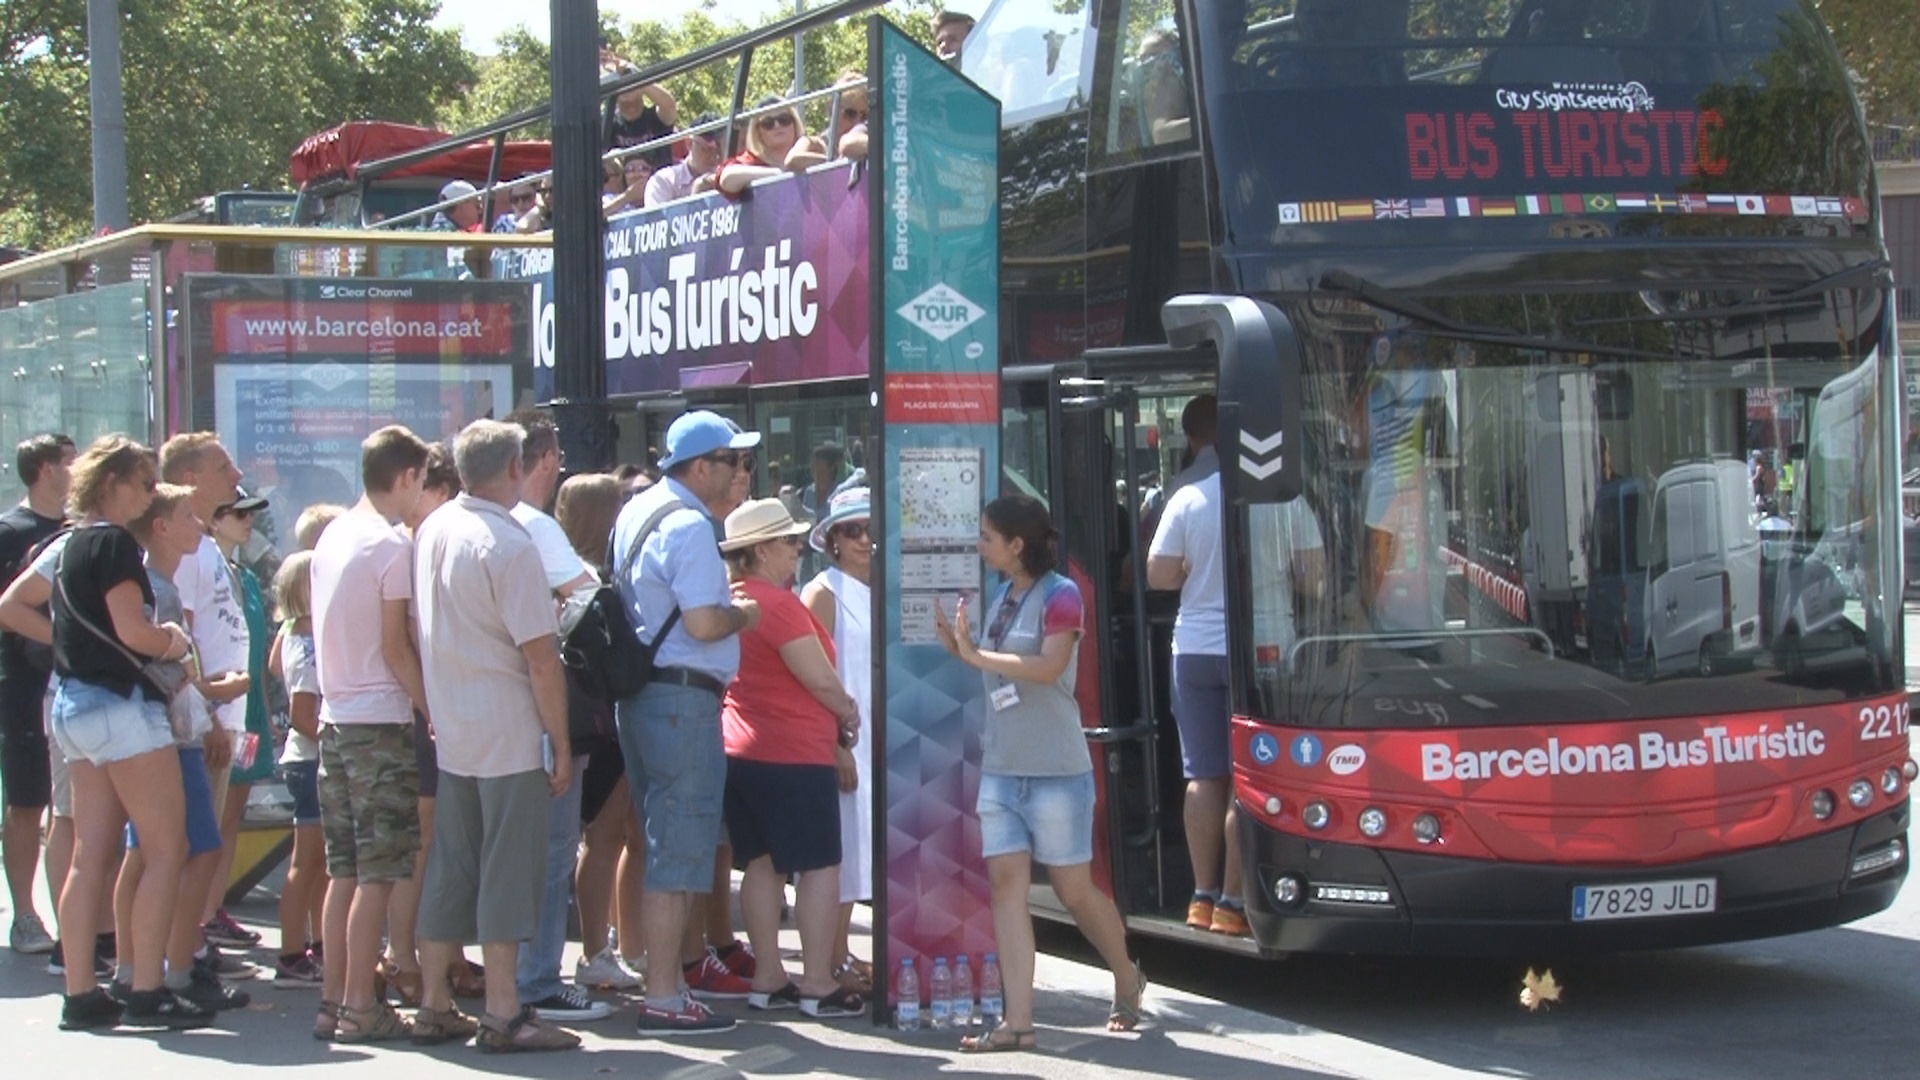 Tourists waiting in line at the tour bus stop